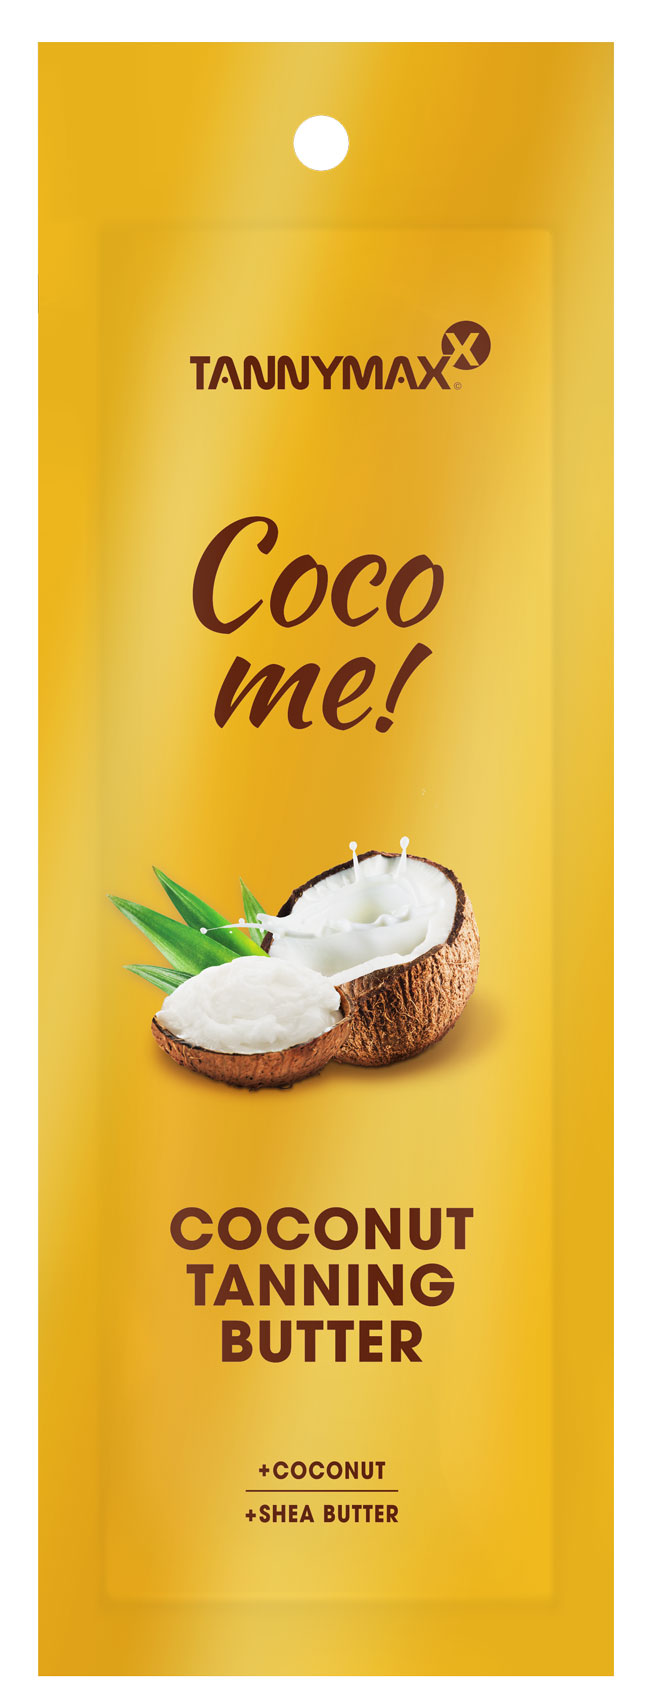 Tannymaxx Coco Me! Coconut Tanning Butter 15 ml